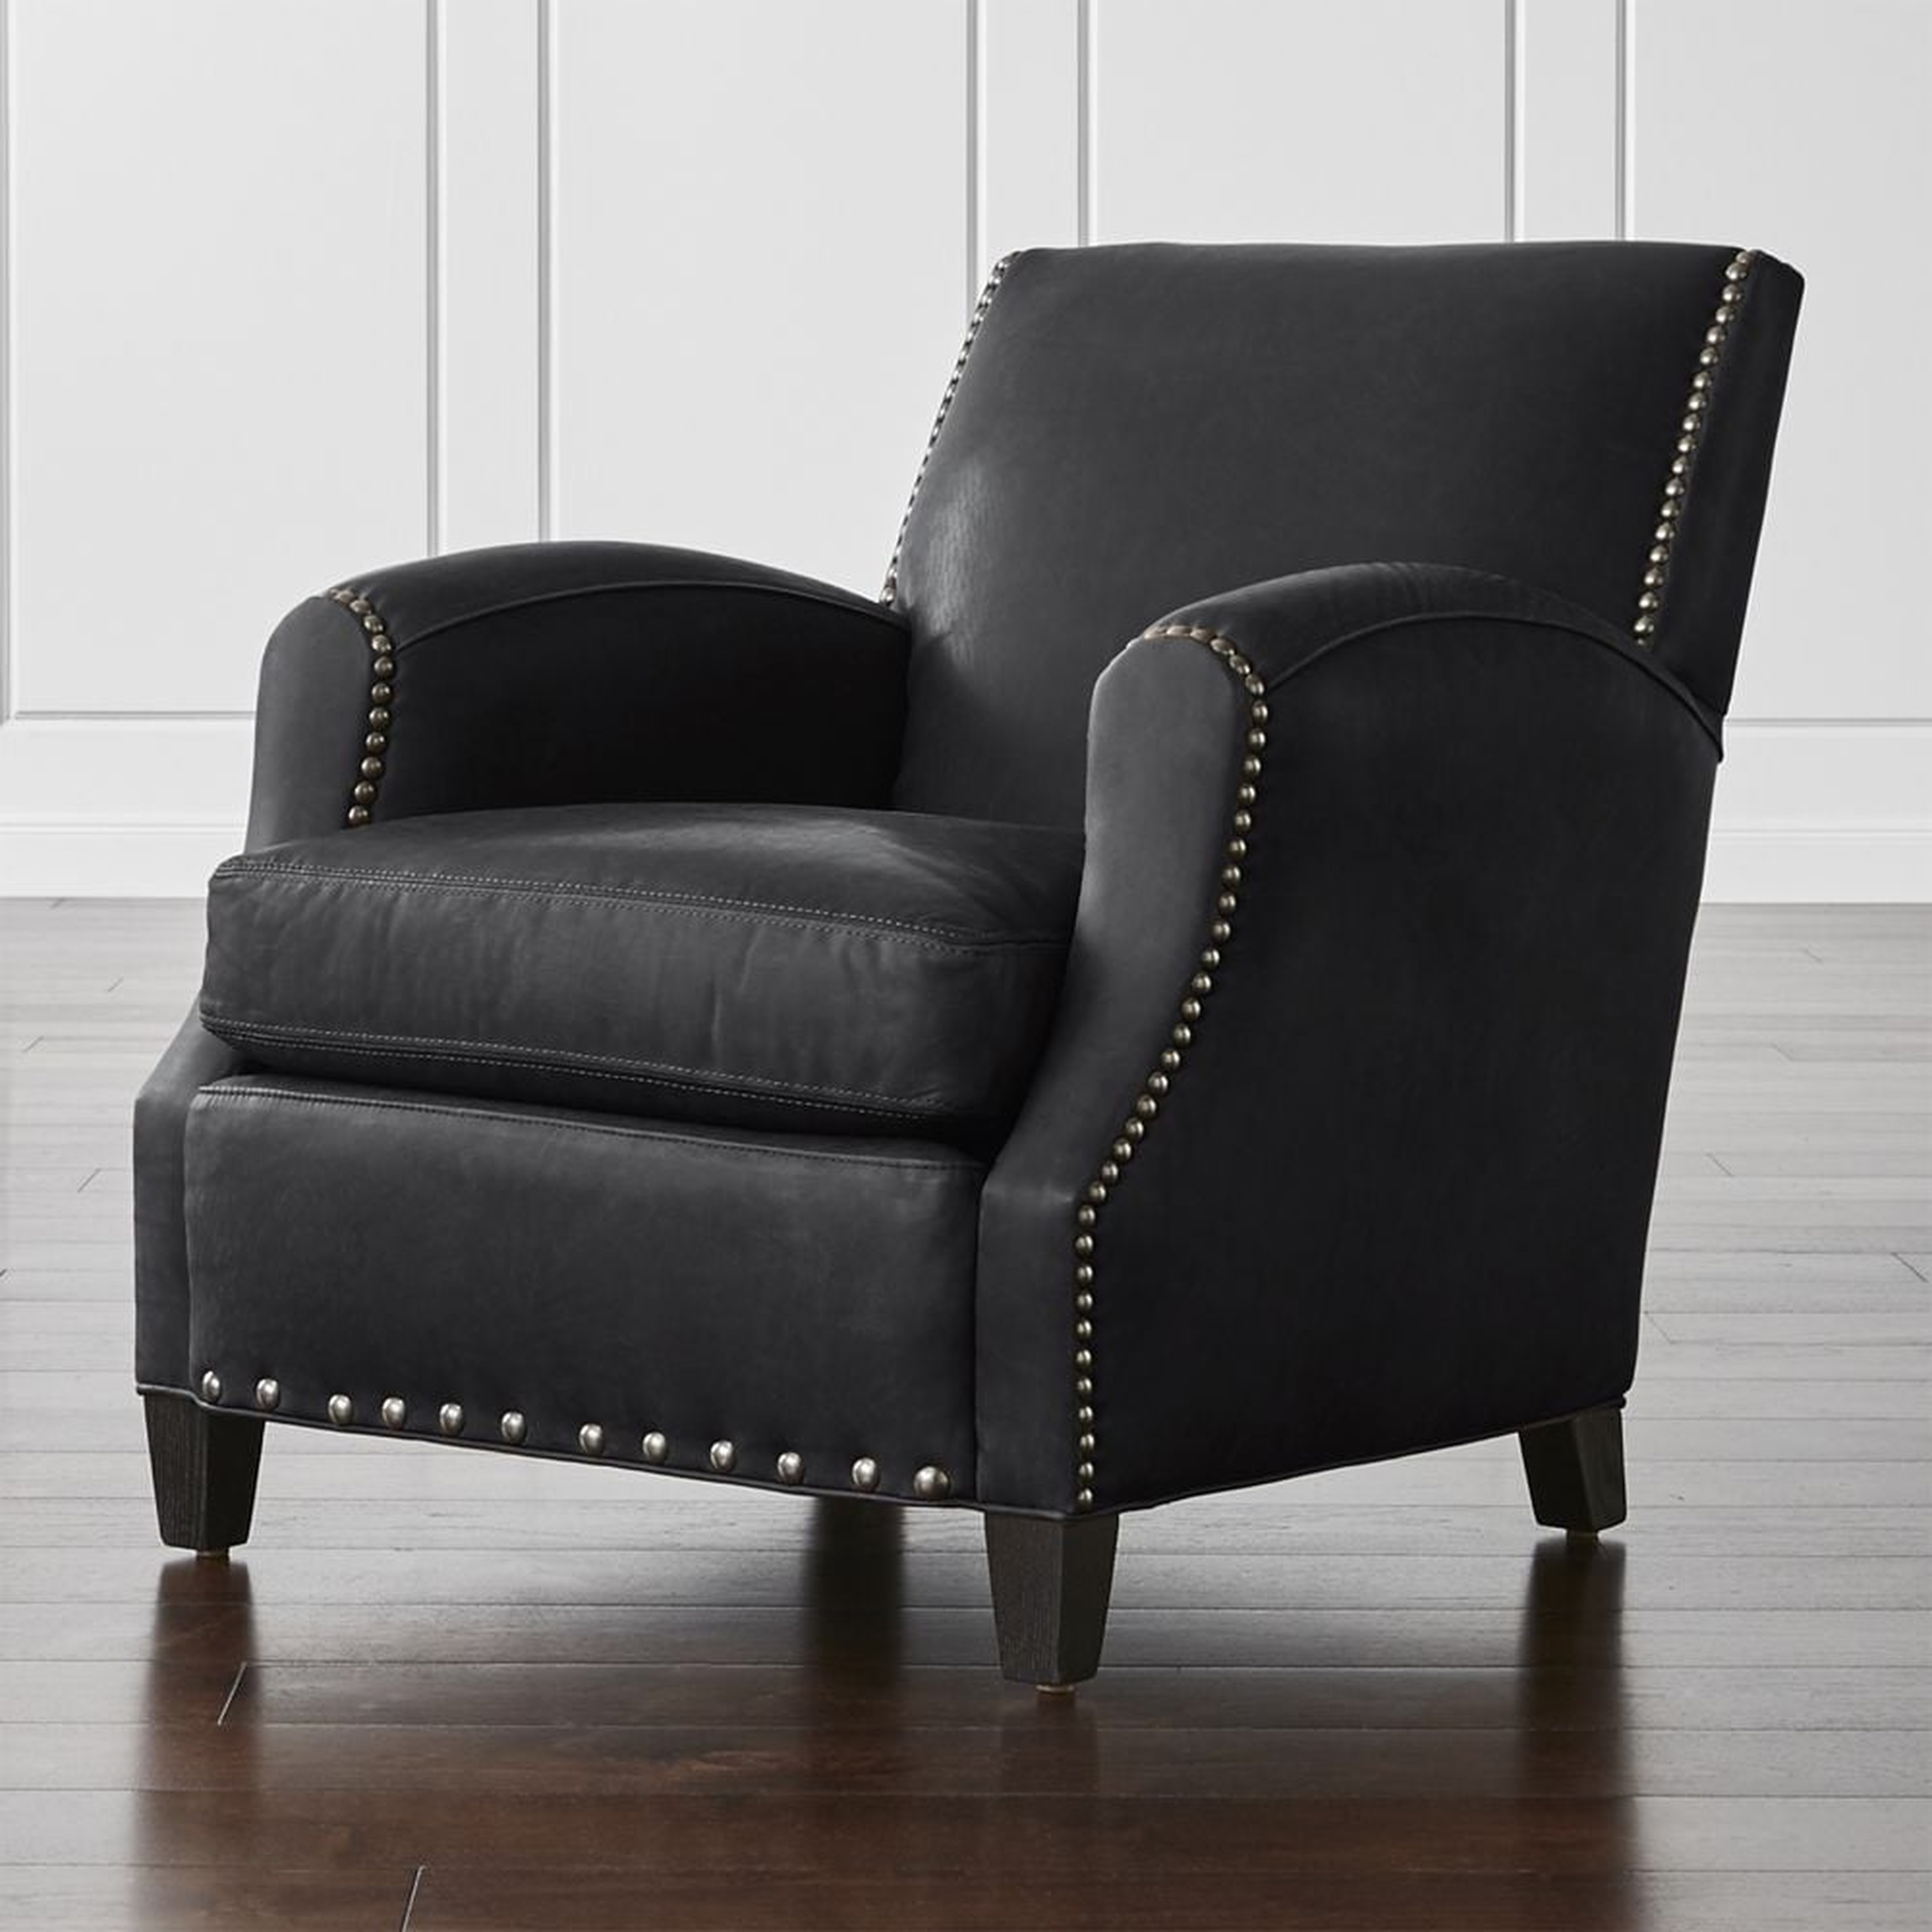 Metropole Leather Chair - Crate and Barrel